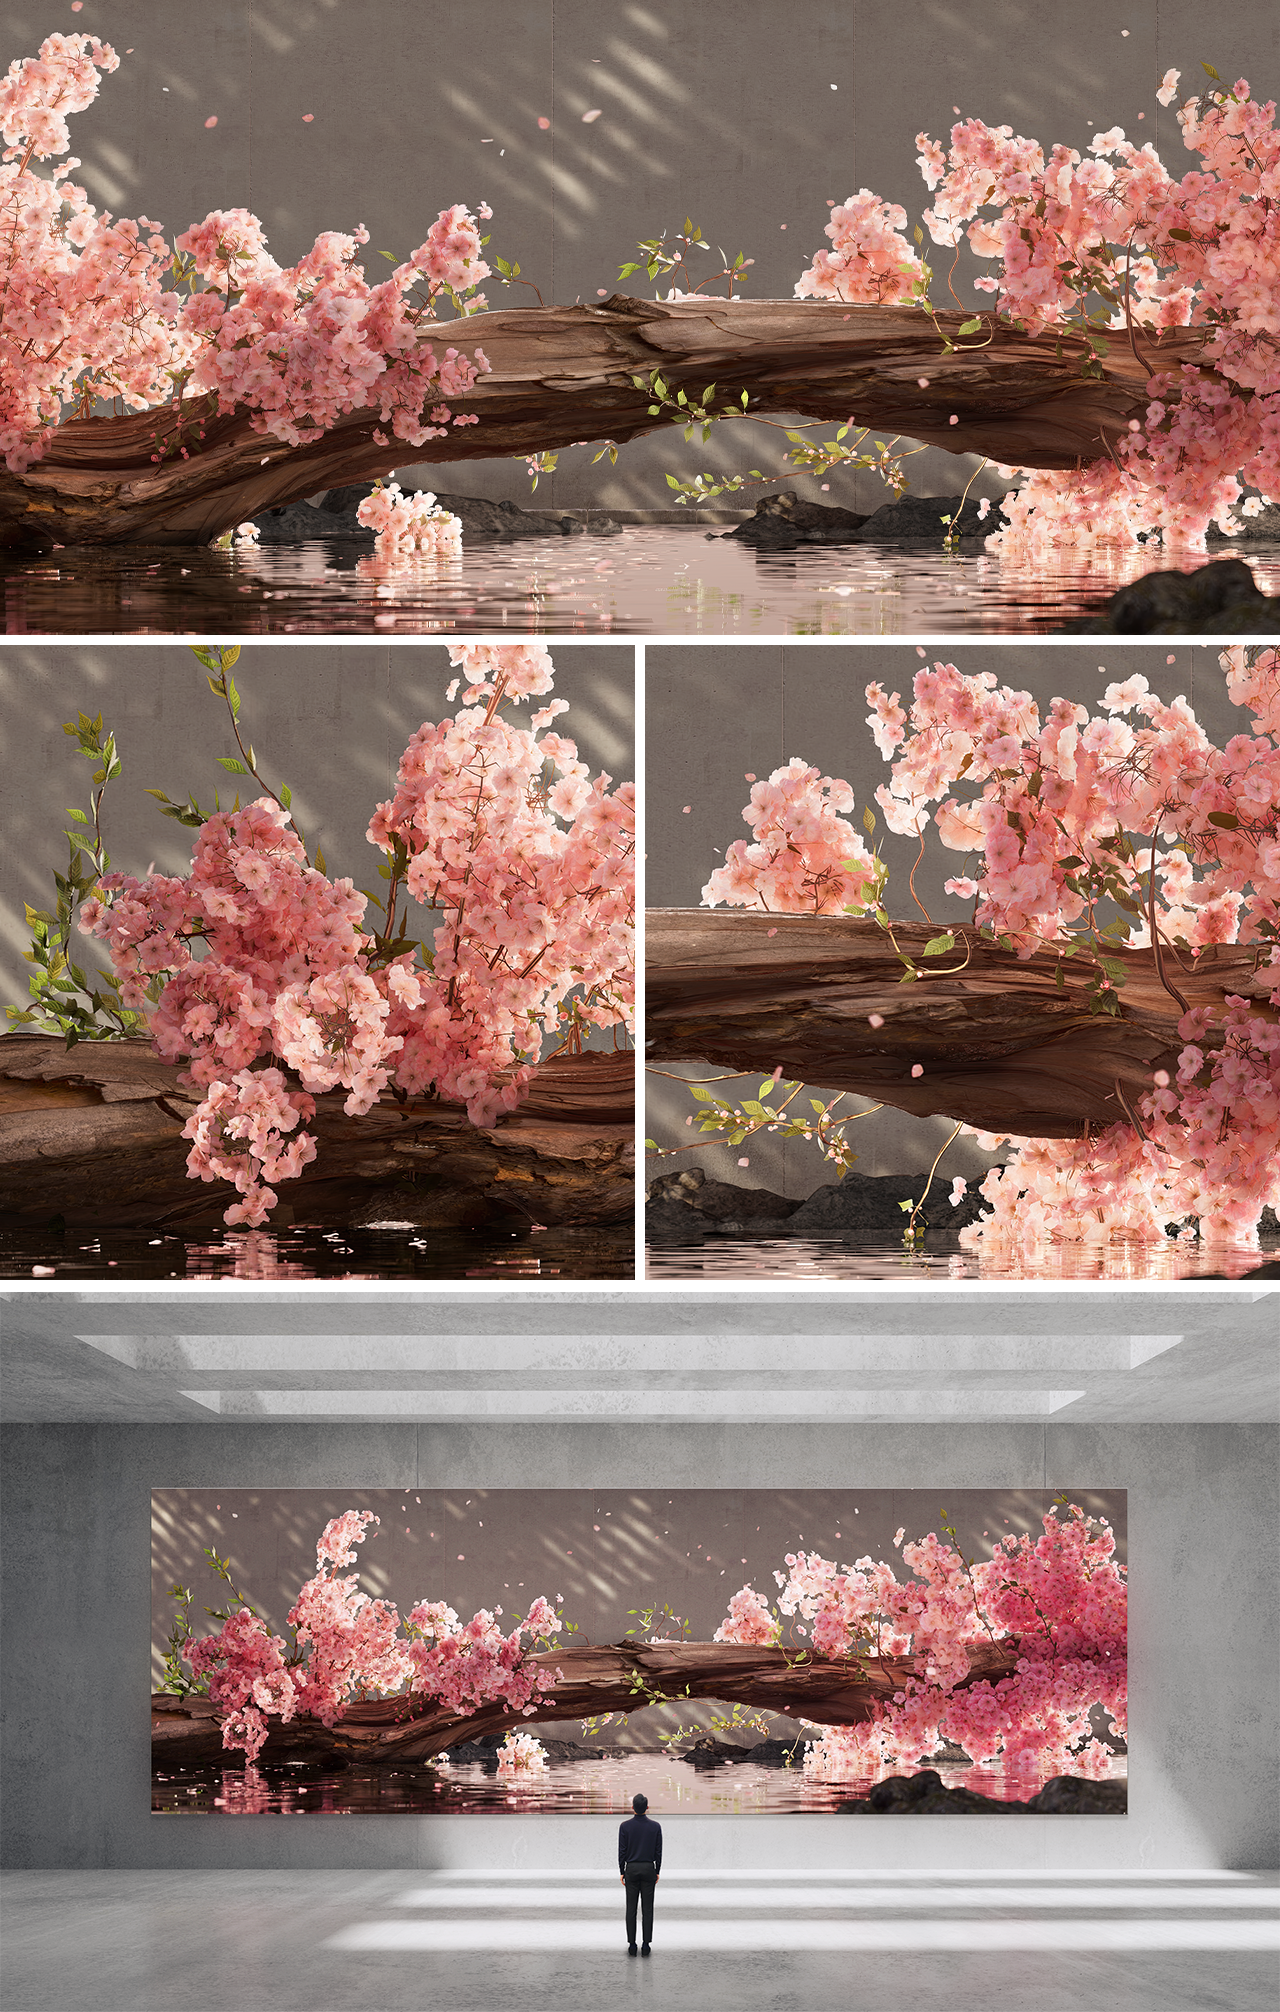 BLOOMING : CHERRY BLOSSOM